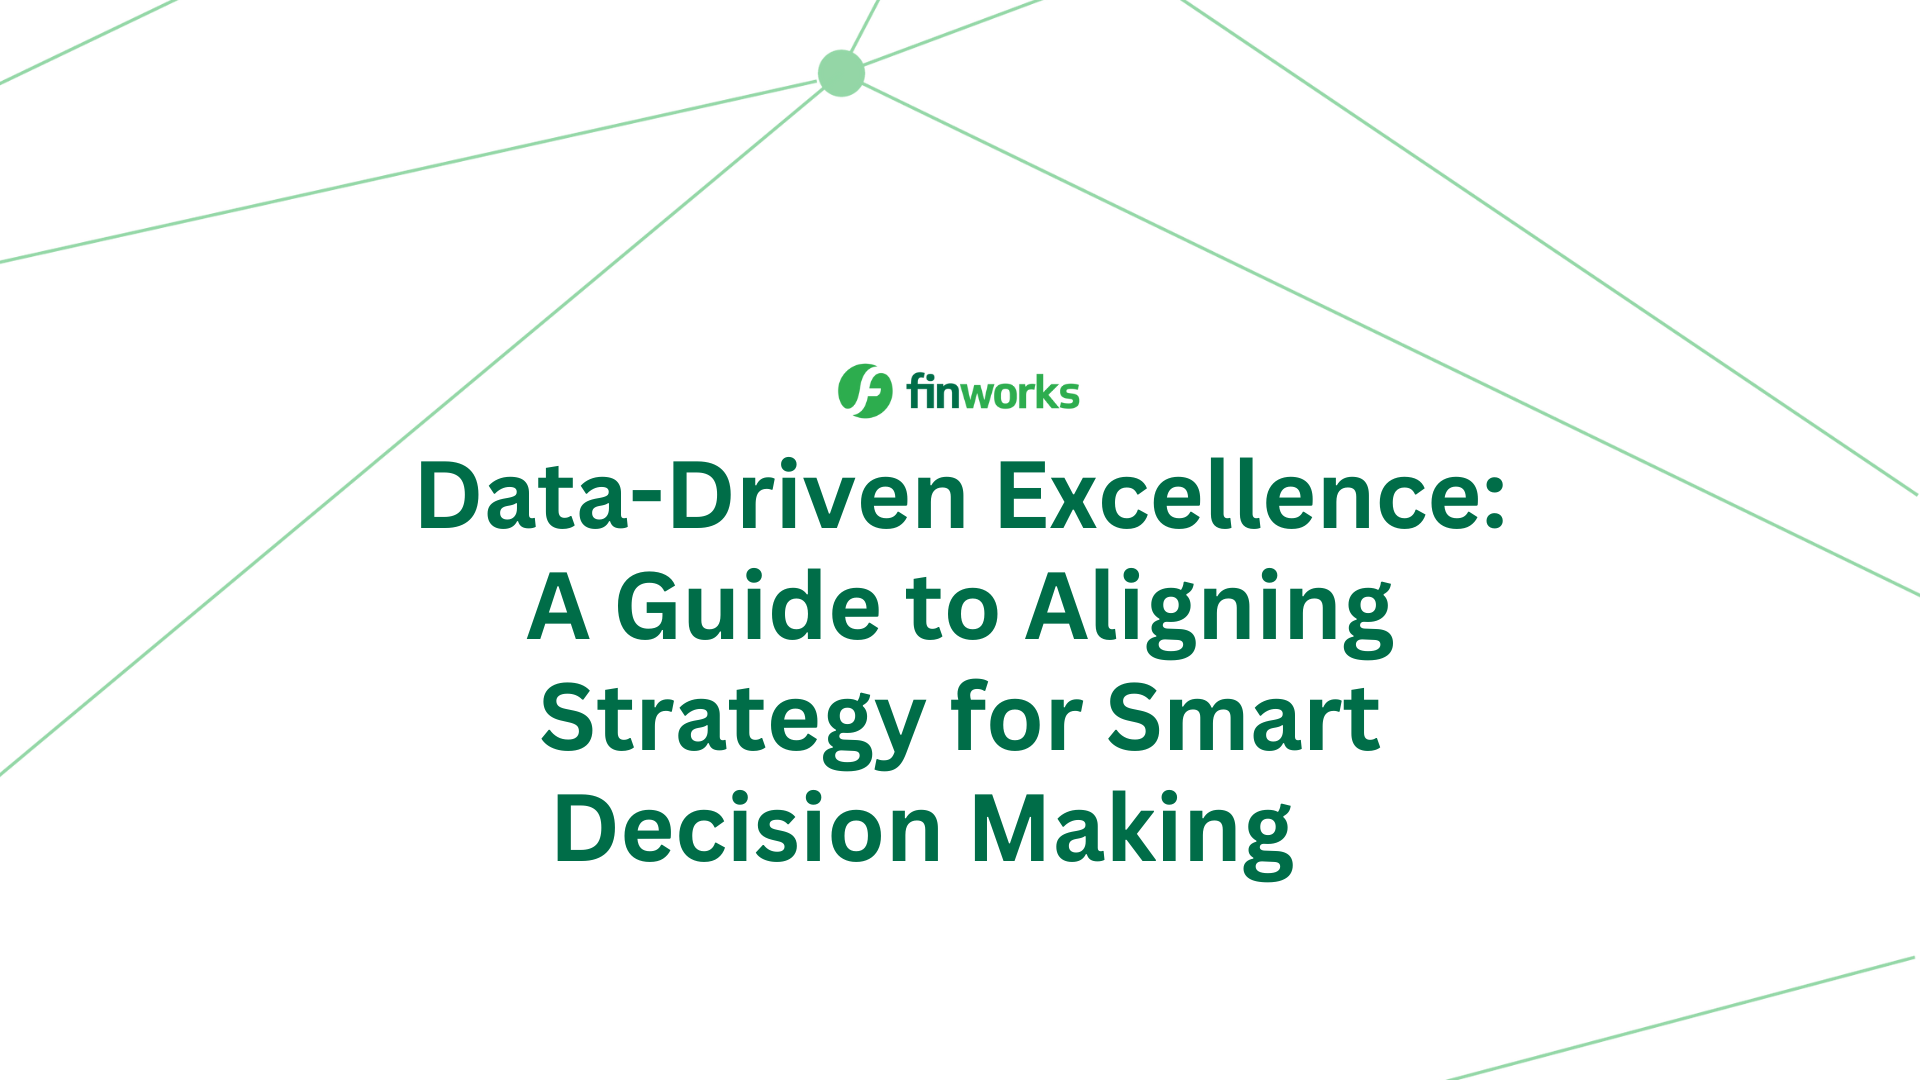 Data-Driven Excellence: A Guide to Aligning Strategy for Smart Decision Making  